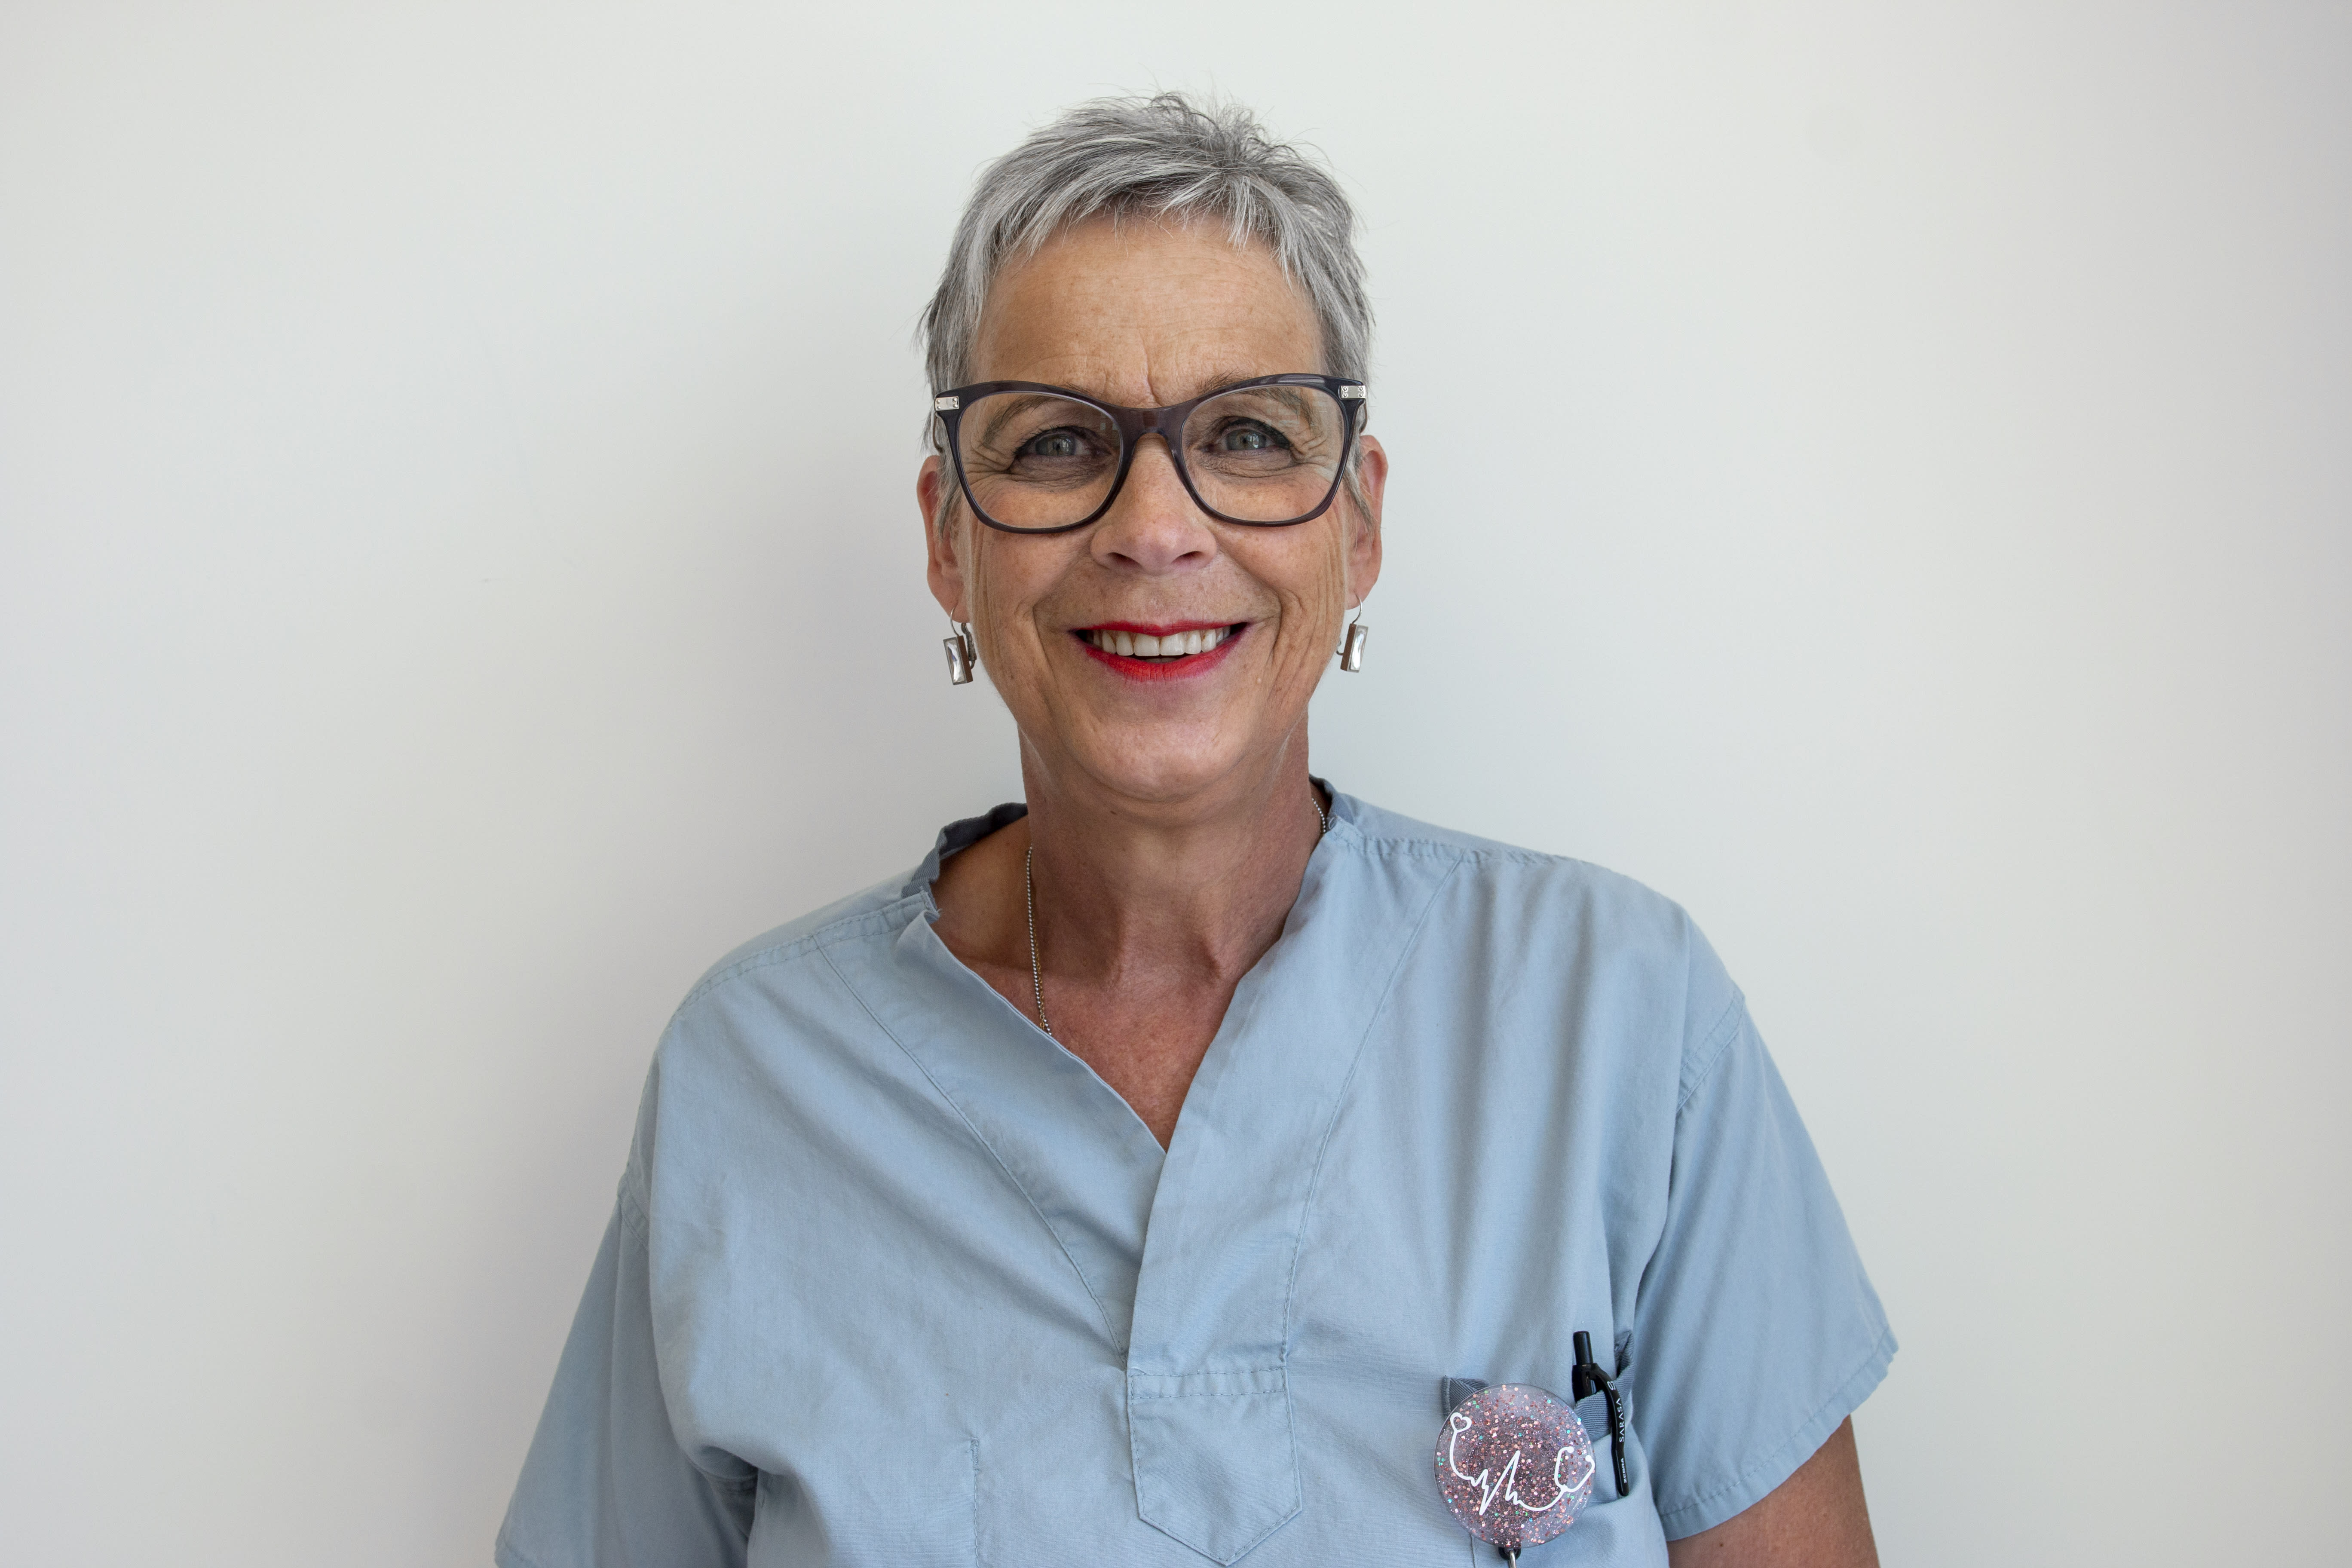 A woman smiles brightly for the camera. She is wearing scrubs and stands against a plain background.